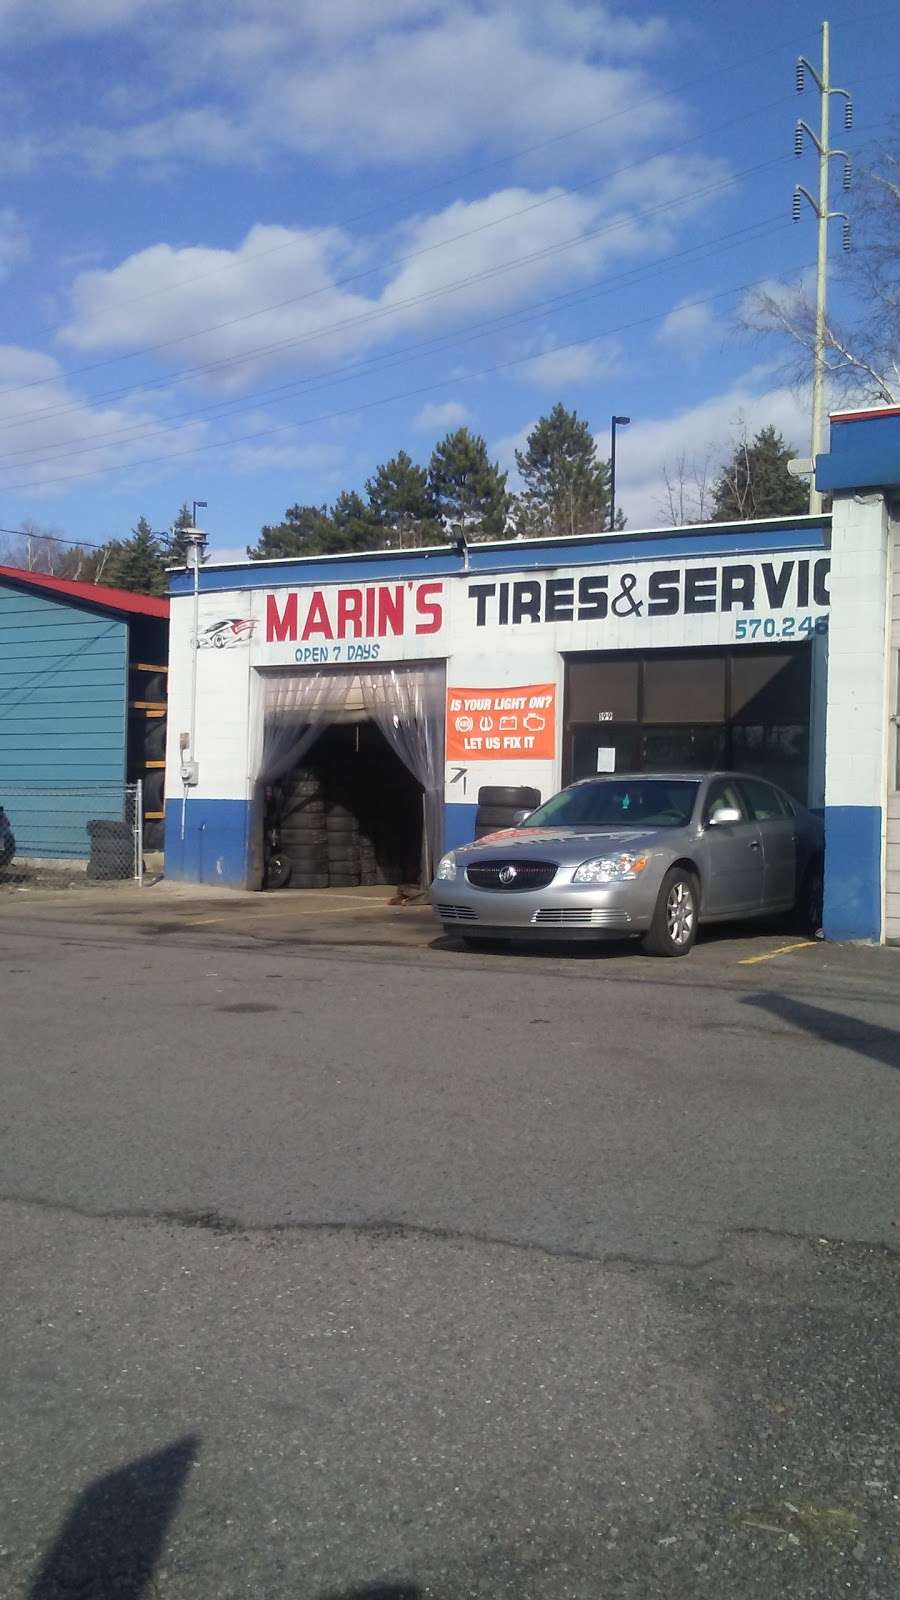 Marins Tires & servises | 199 Spring St, Wilkes-Barre, PA 18702 | Phone: (570) 246-1407